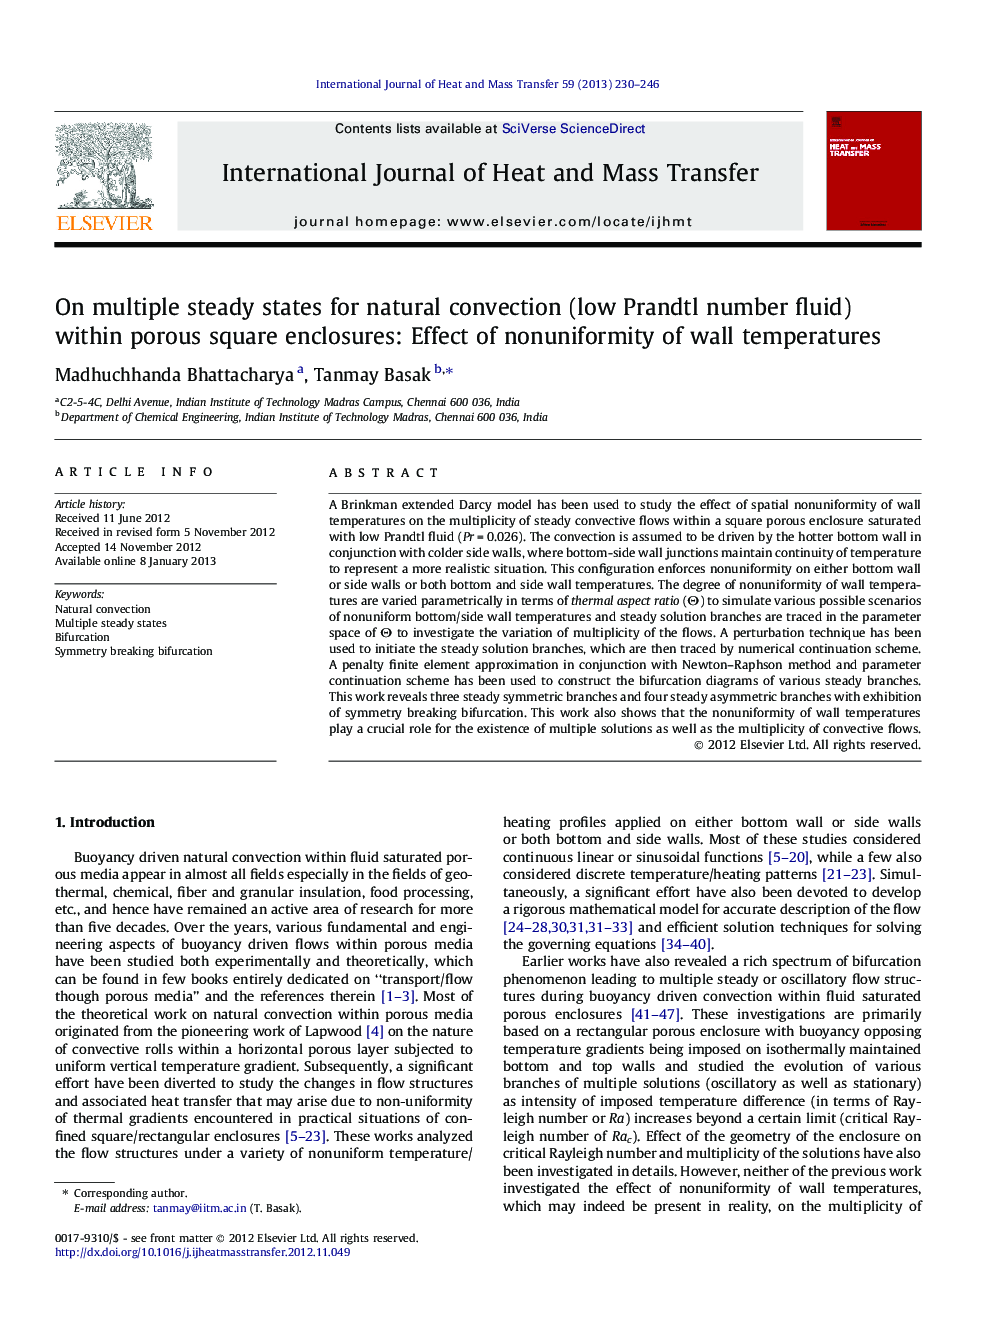 On multiple steady states for natural convection (low Prandtl number fluid) within porous square enclosures: Effect of nonuniformity of wall temperatures